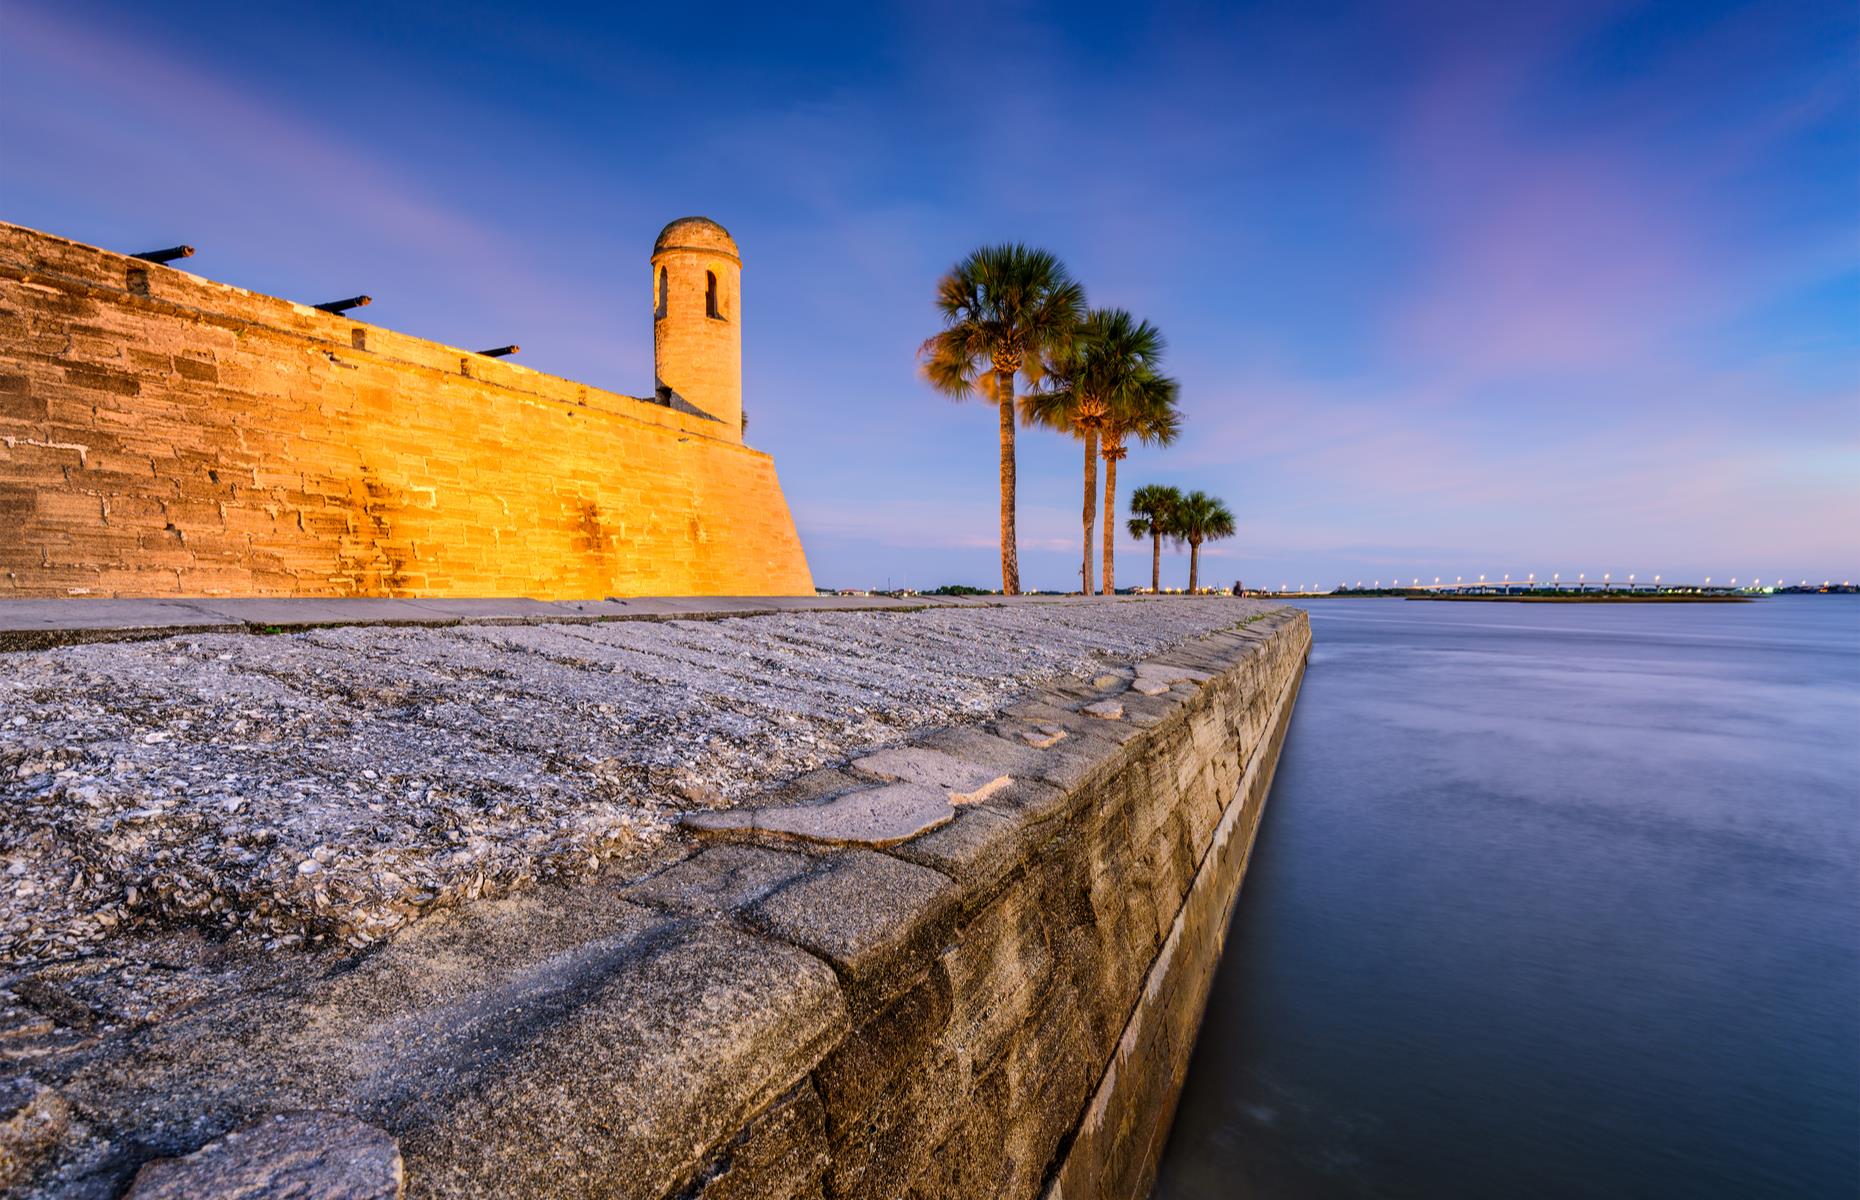 <p>Brooding on the banks of the Matanzas River, Castillo de San Marcos is one of the most important historic forts in the USA, not least because of its age. It dates to the 17th century, making it the country’s oldest masonry fortress. It was built by the Spanish, when Florida was under Spanish rule, and suffered two major sieges over the centuries – one in 1702 and one in 1704, both led by English forces. You can typically explore the fortress (check <a href="https://www.nps.gov/casa/index.htm">the NPS site</a> for details) and <a href="https://www.nps.gov/casa/learn/photosmultimedia/virtualtour.htm">virtual tours</a> are also available.</p>